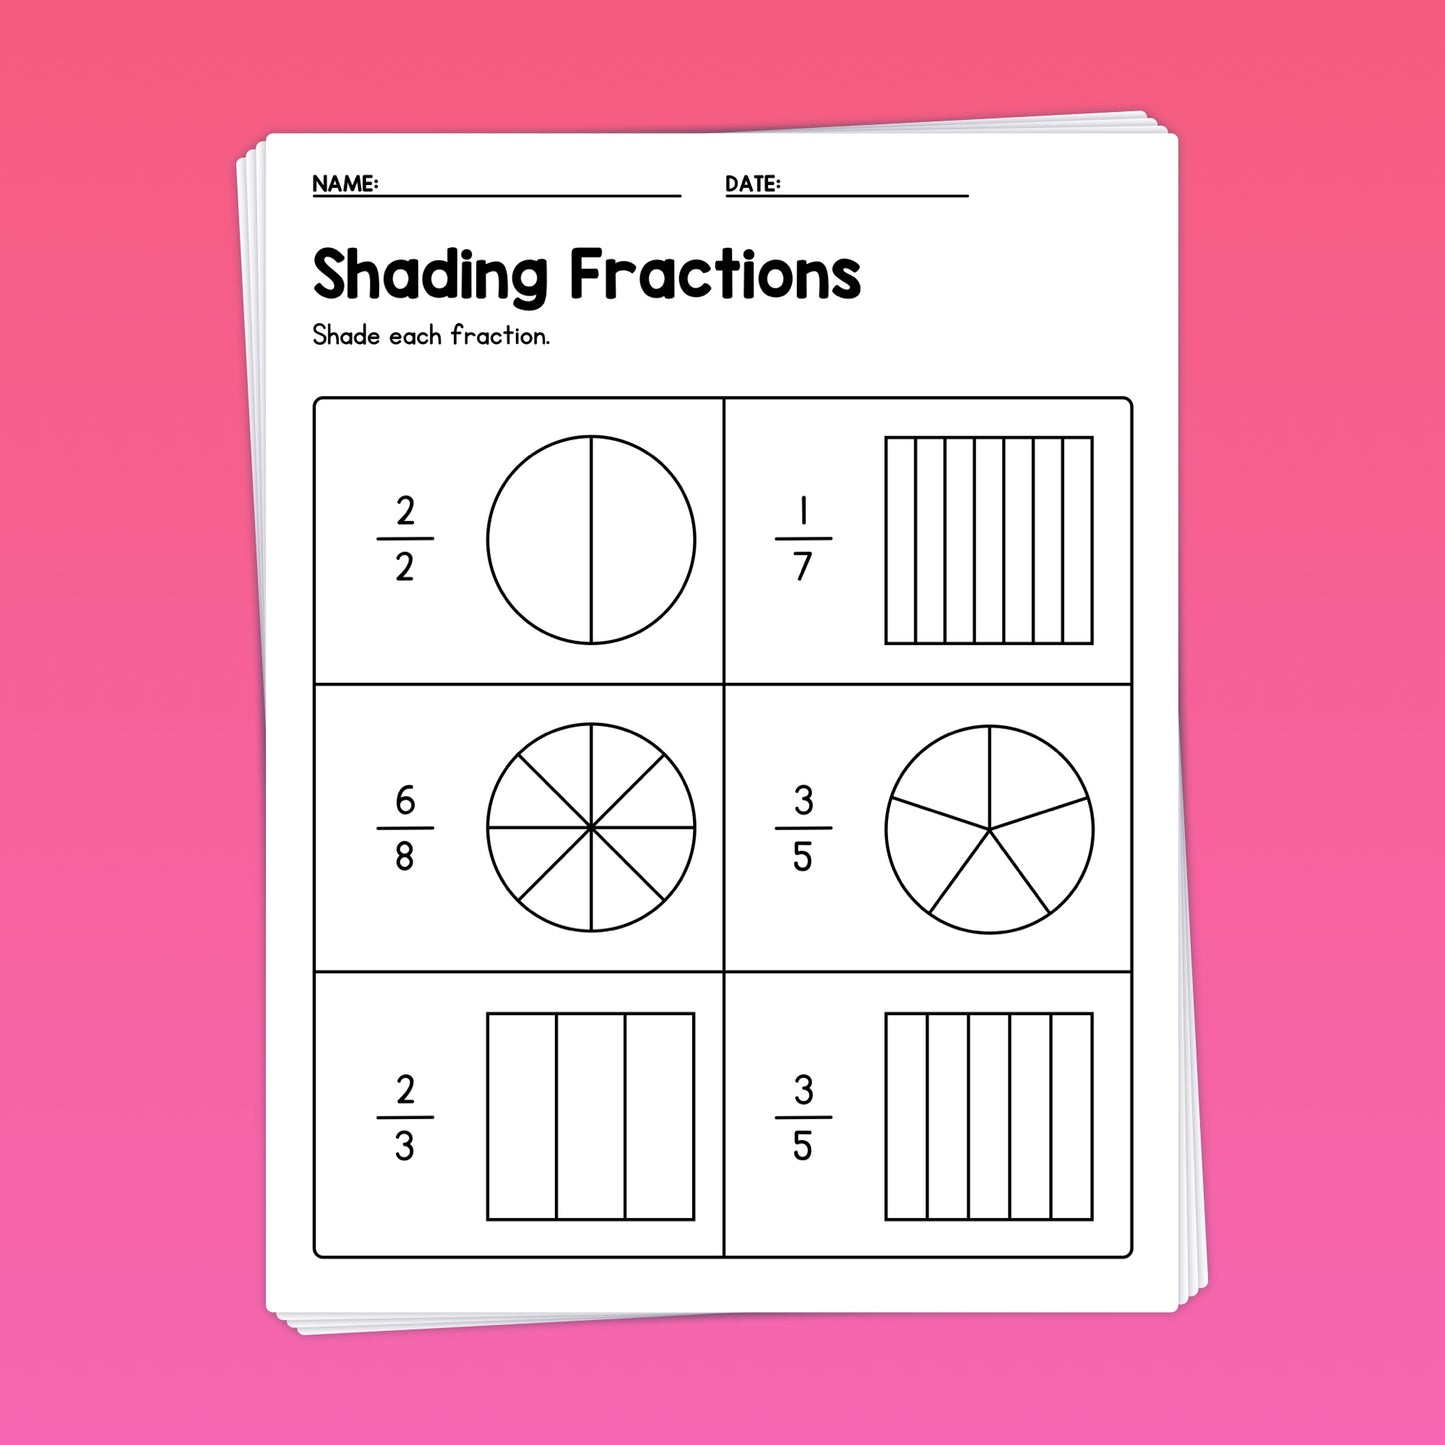 Fractions and partitioning shapes